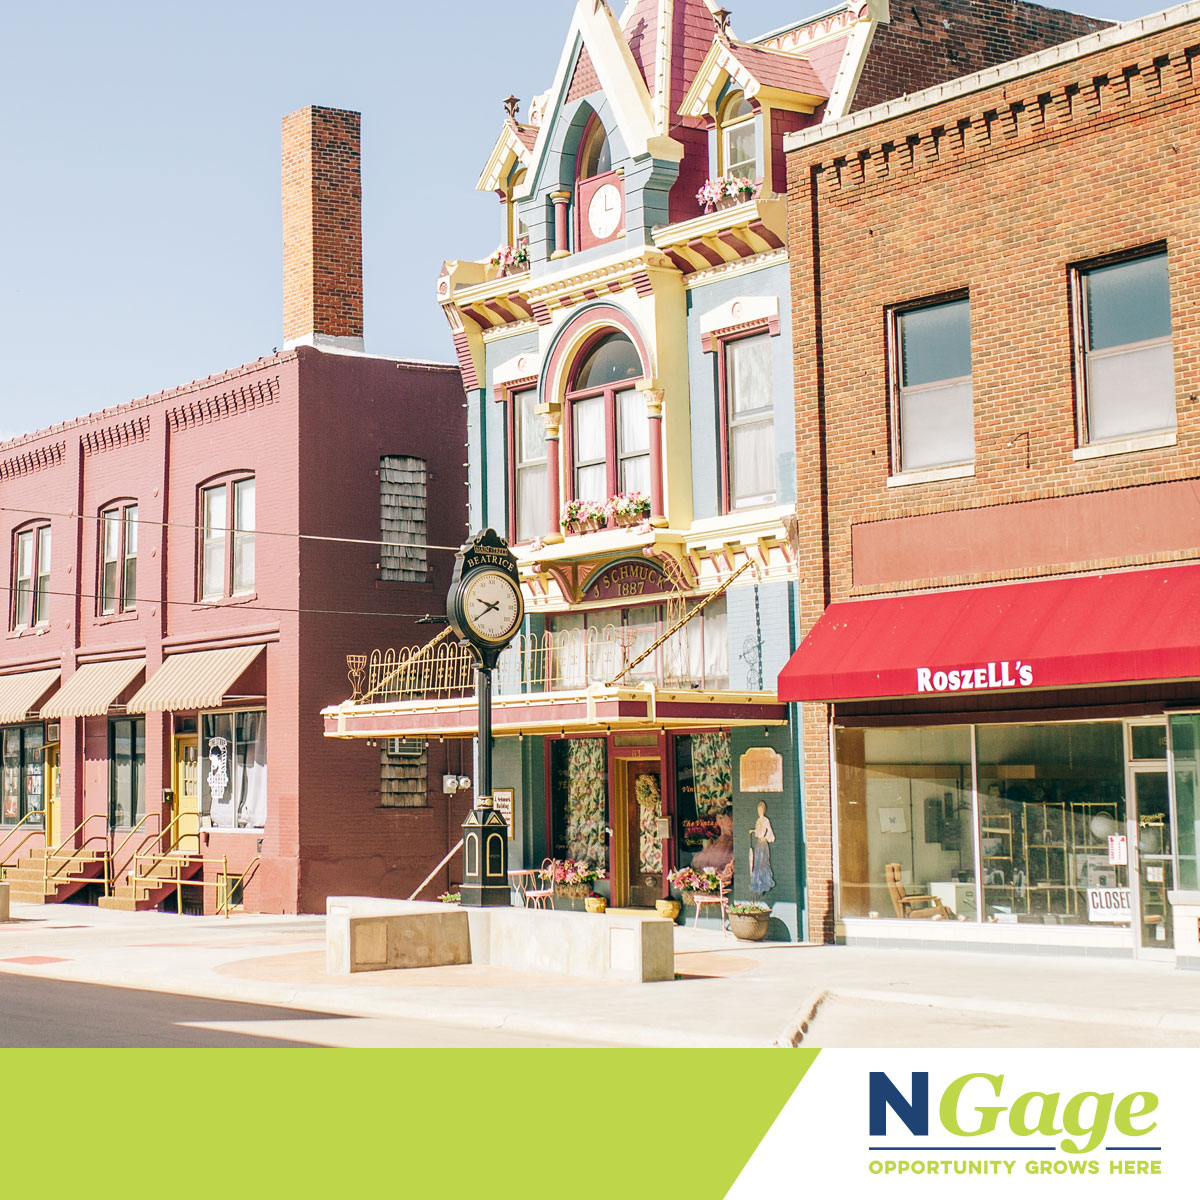 NGage Works with the City of Beatrice on Downtown Projects Photo